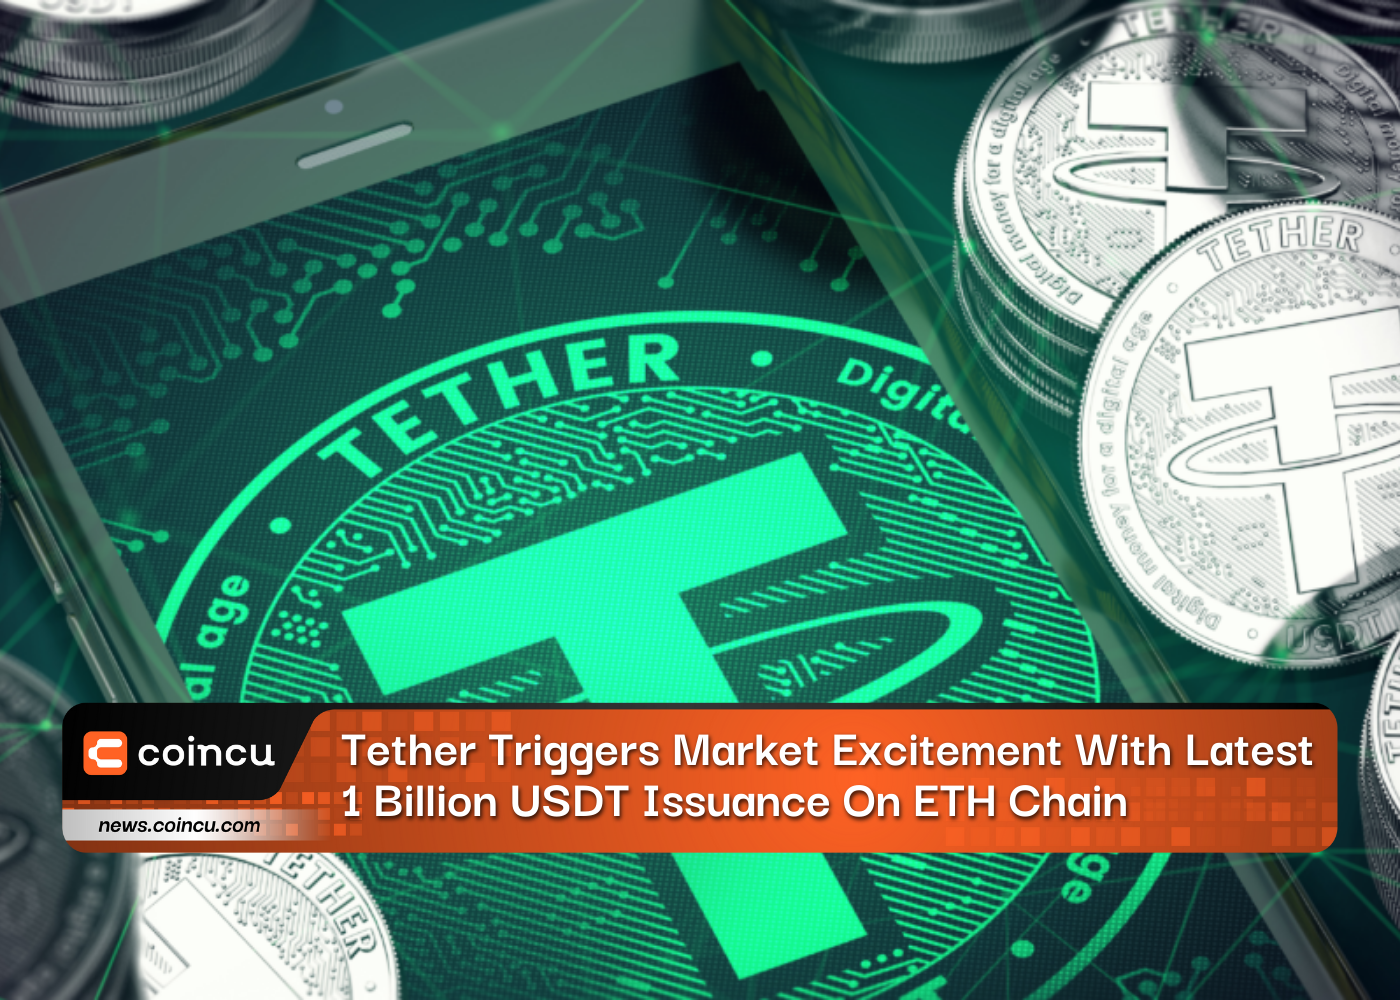 Tether Triggers Market Excitement With Latest